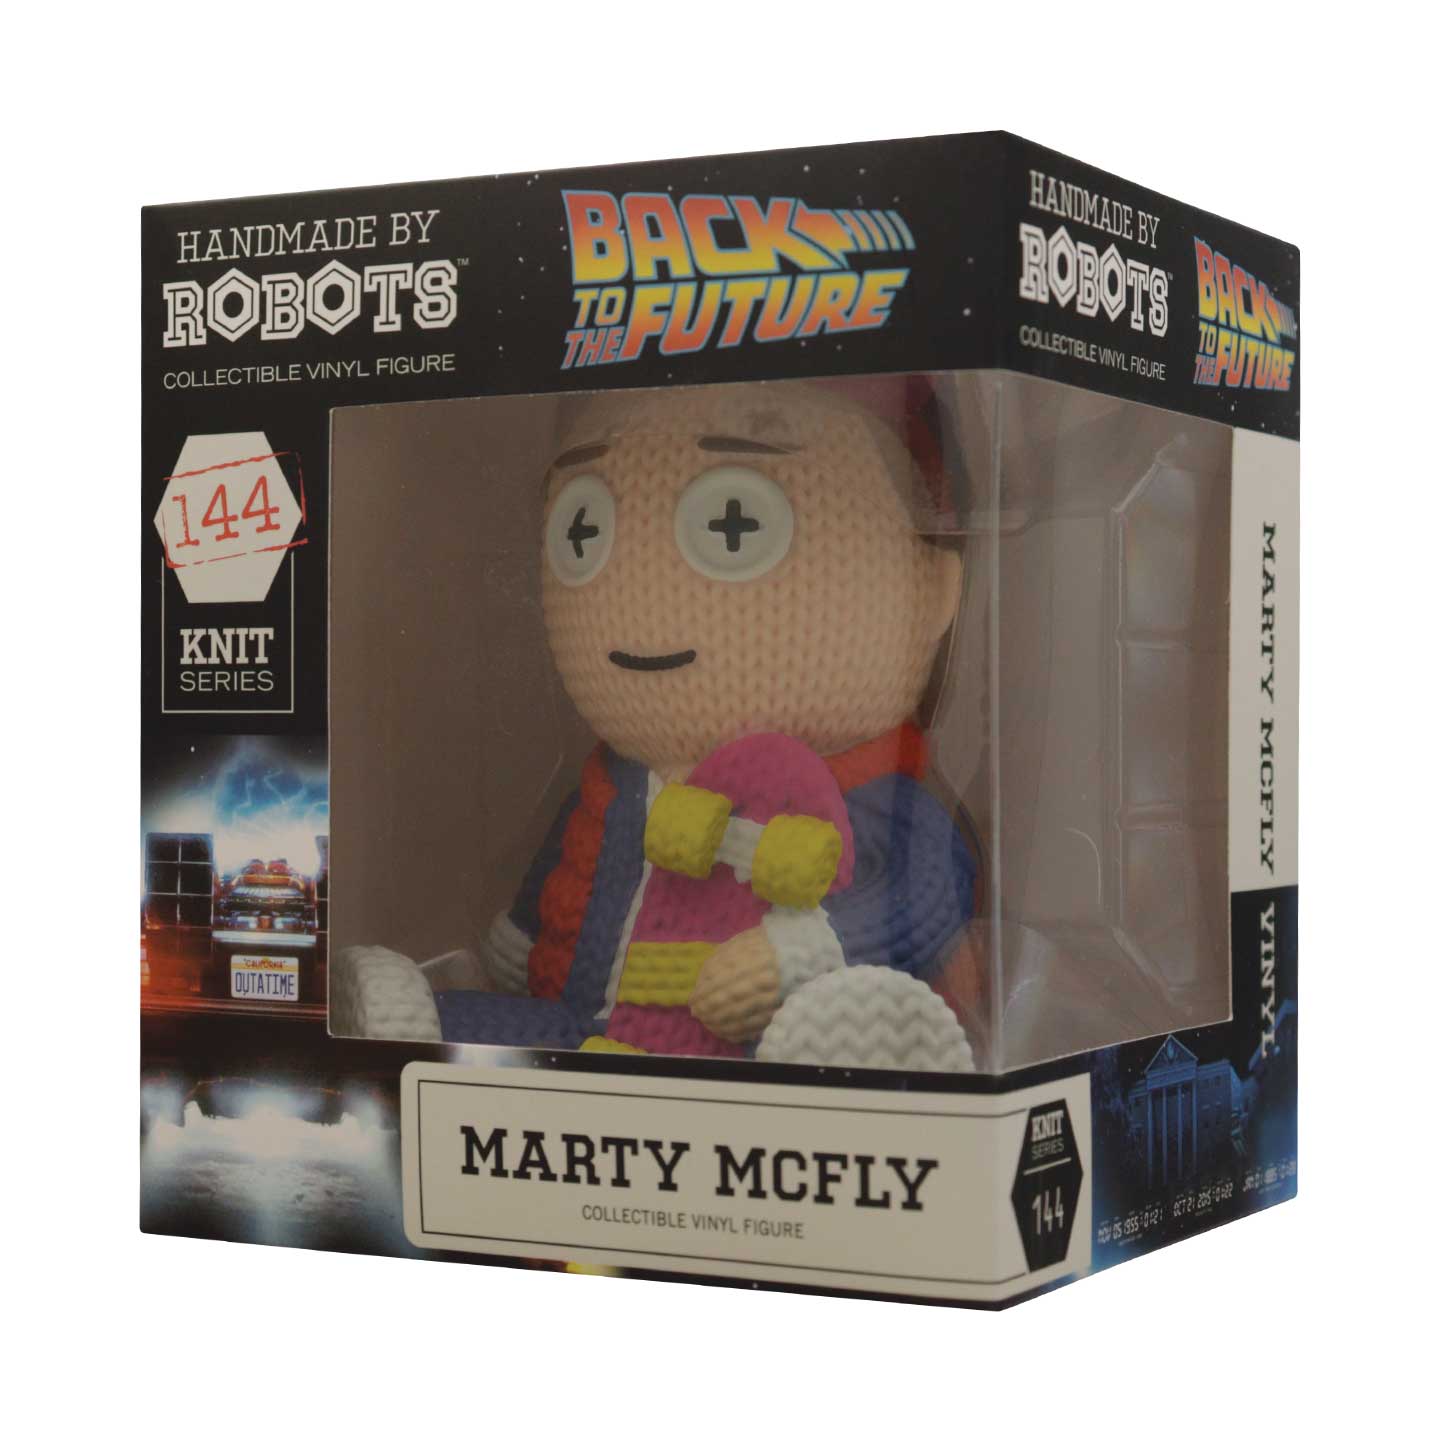 Back to the Future - Marty McFly Collectible Vinyl Figure from Handmade by Robots